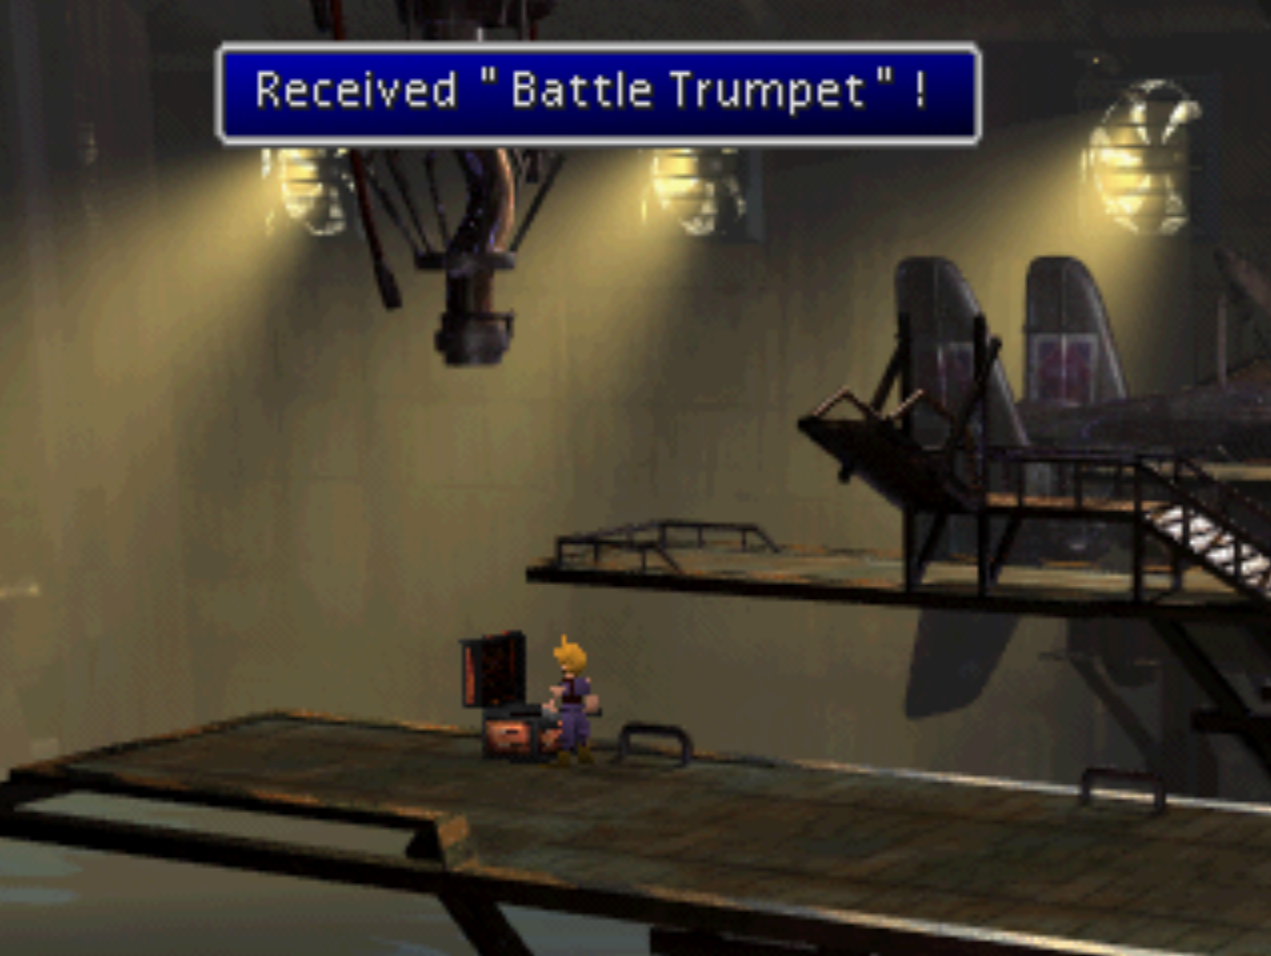 Battle trumpet acquired